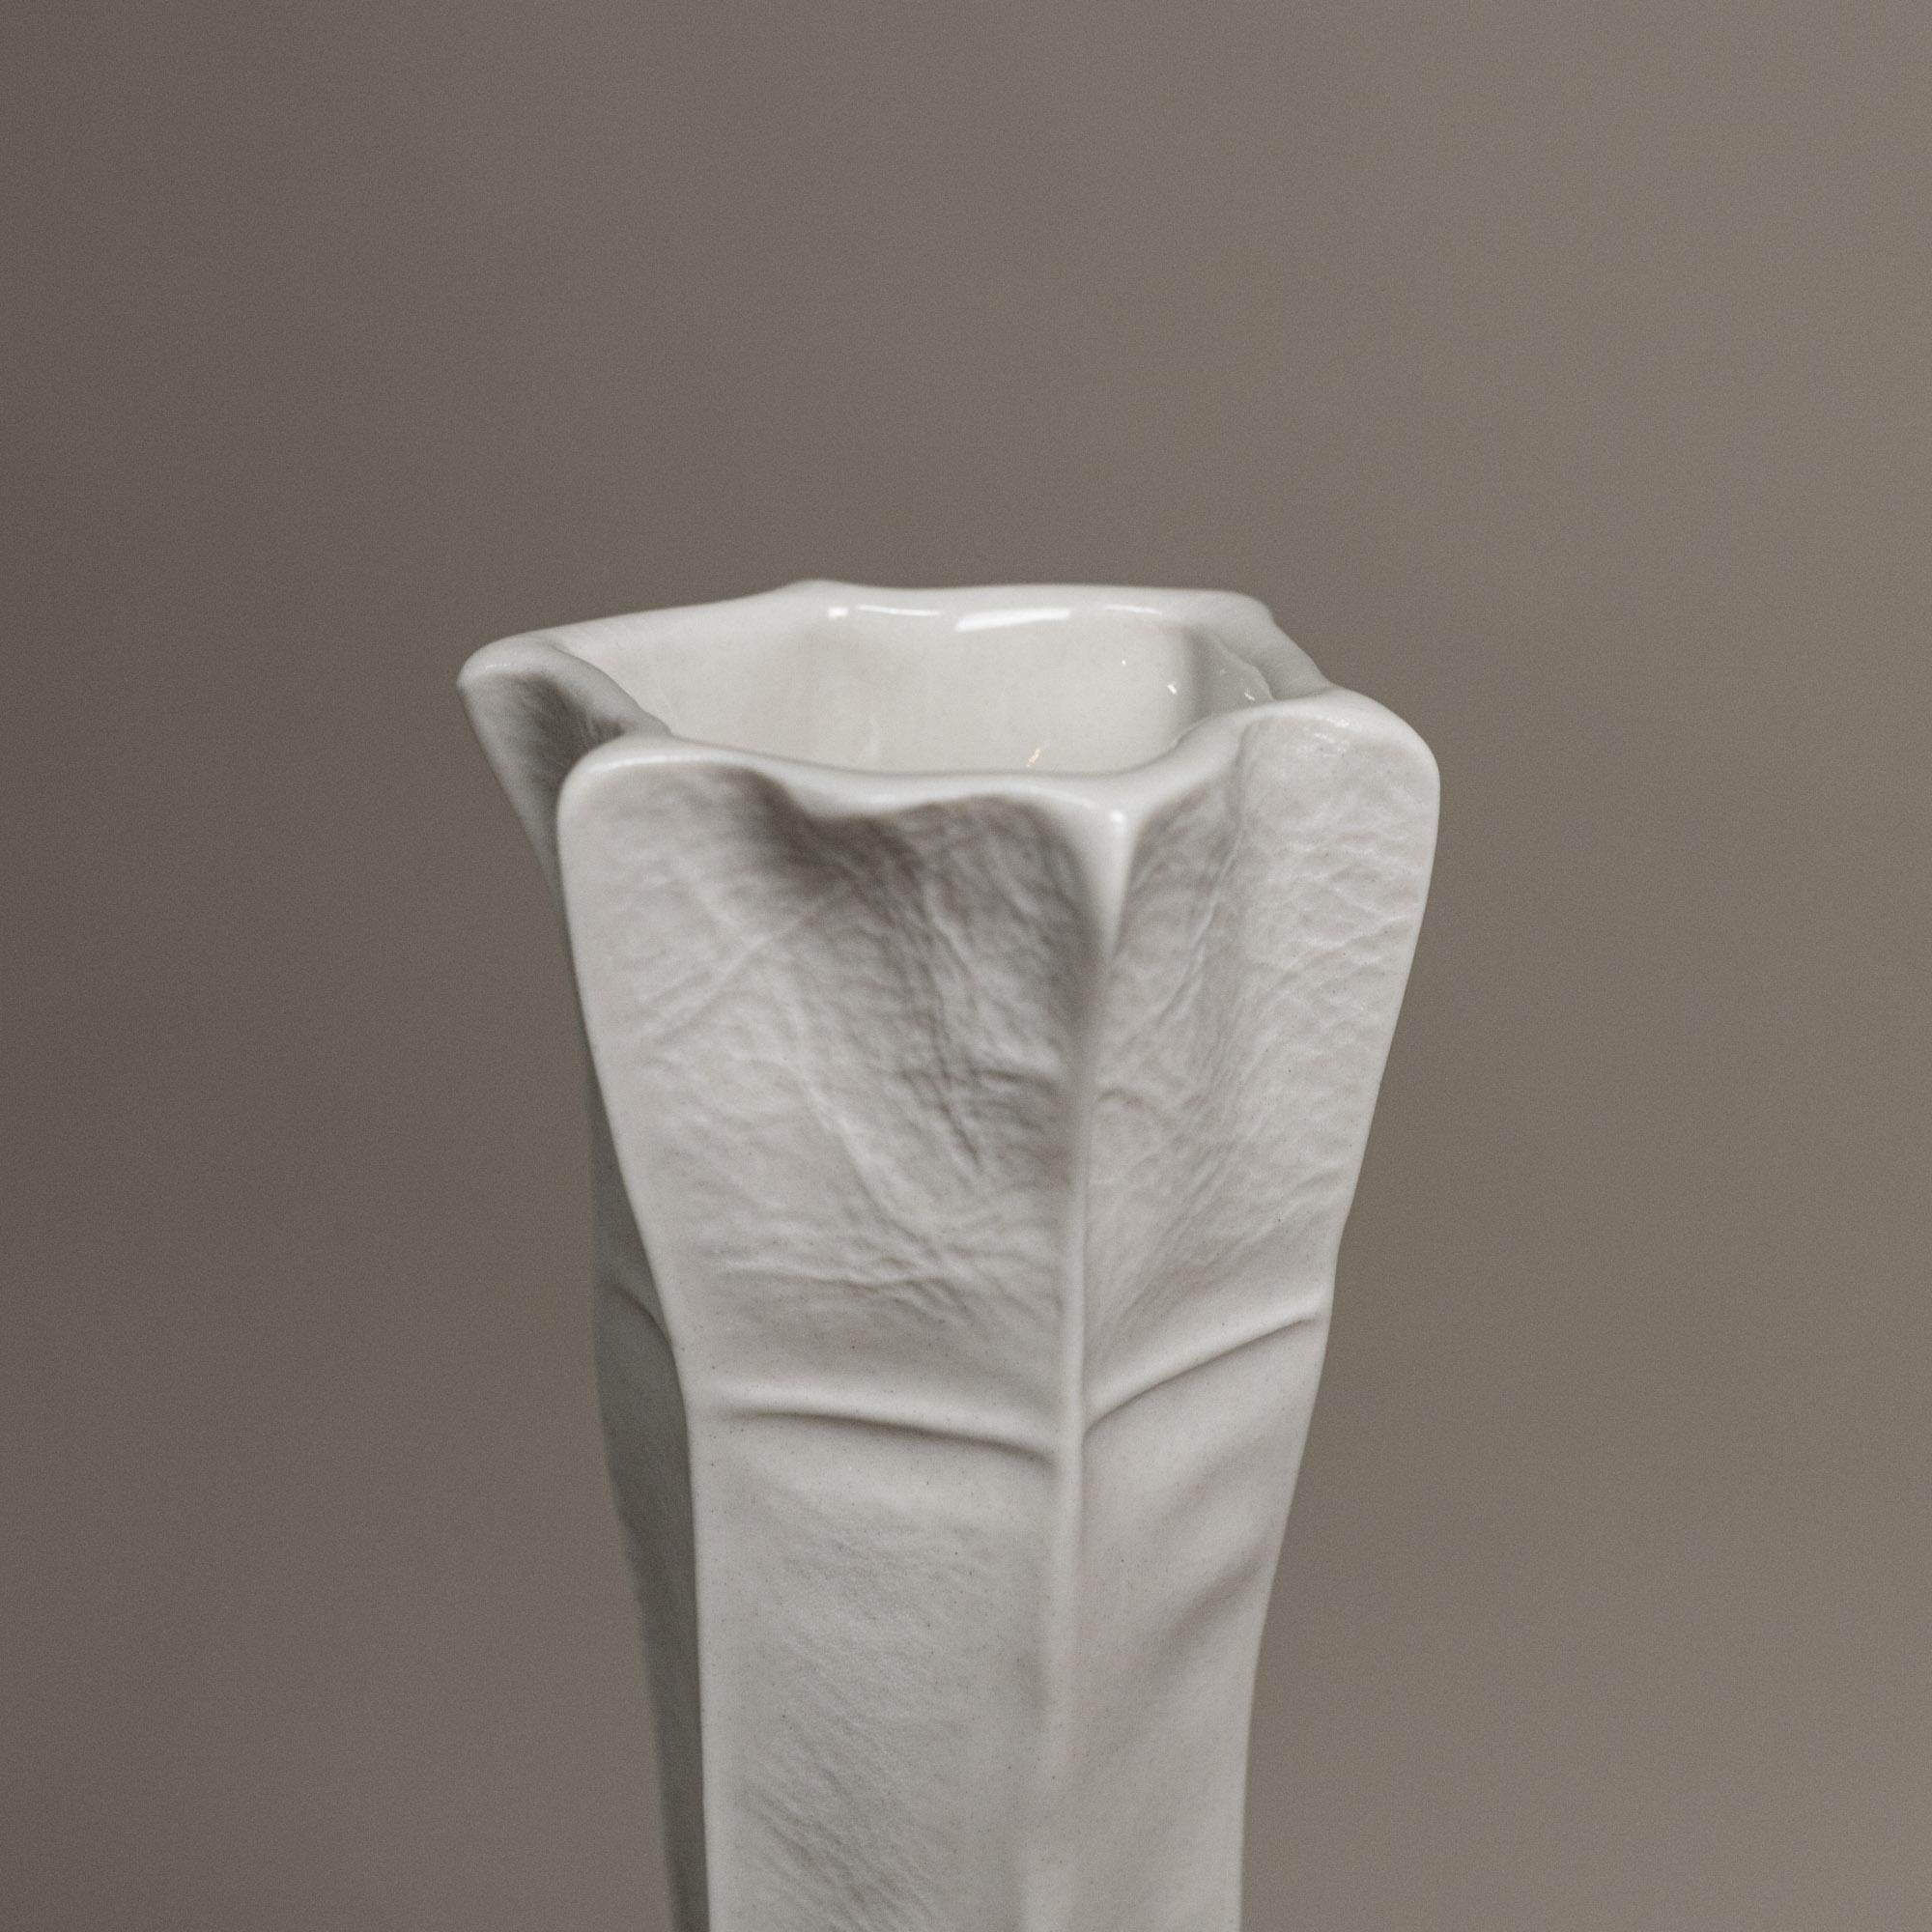 Other In-Stock, White Ceramic Kawa Vase 12, Leather textured Organic Modern porcelain For Sale